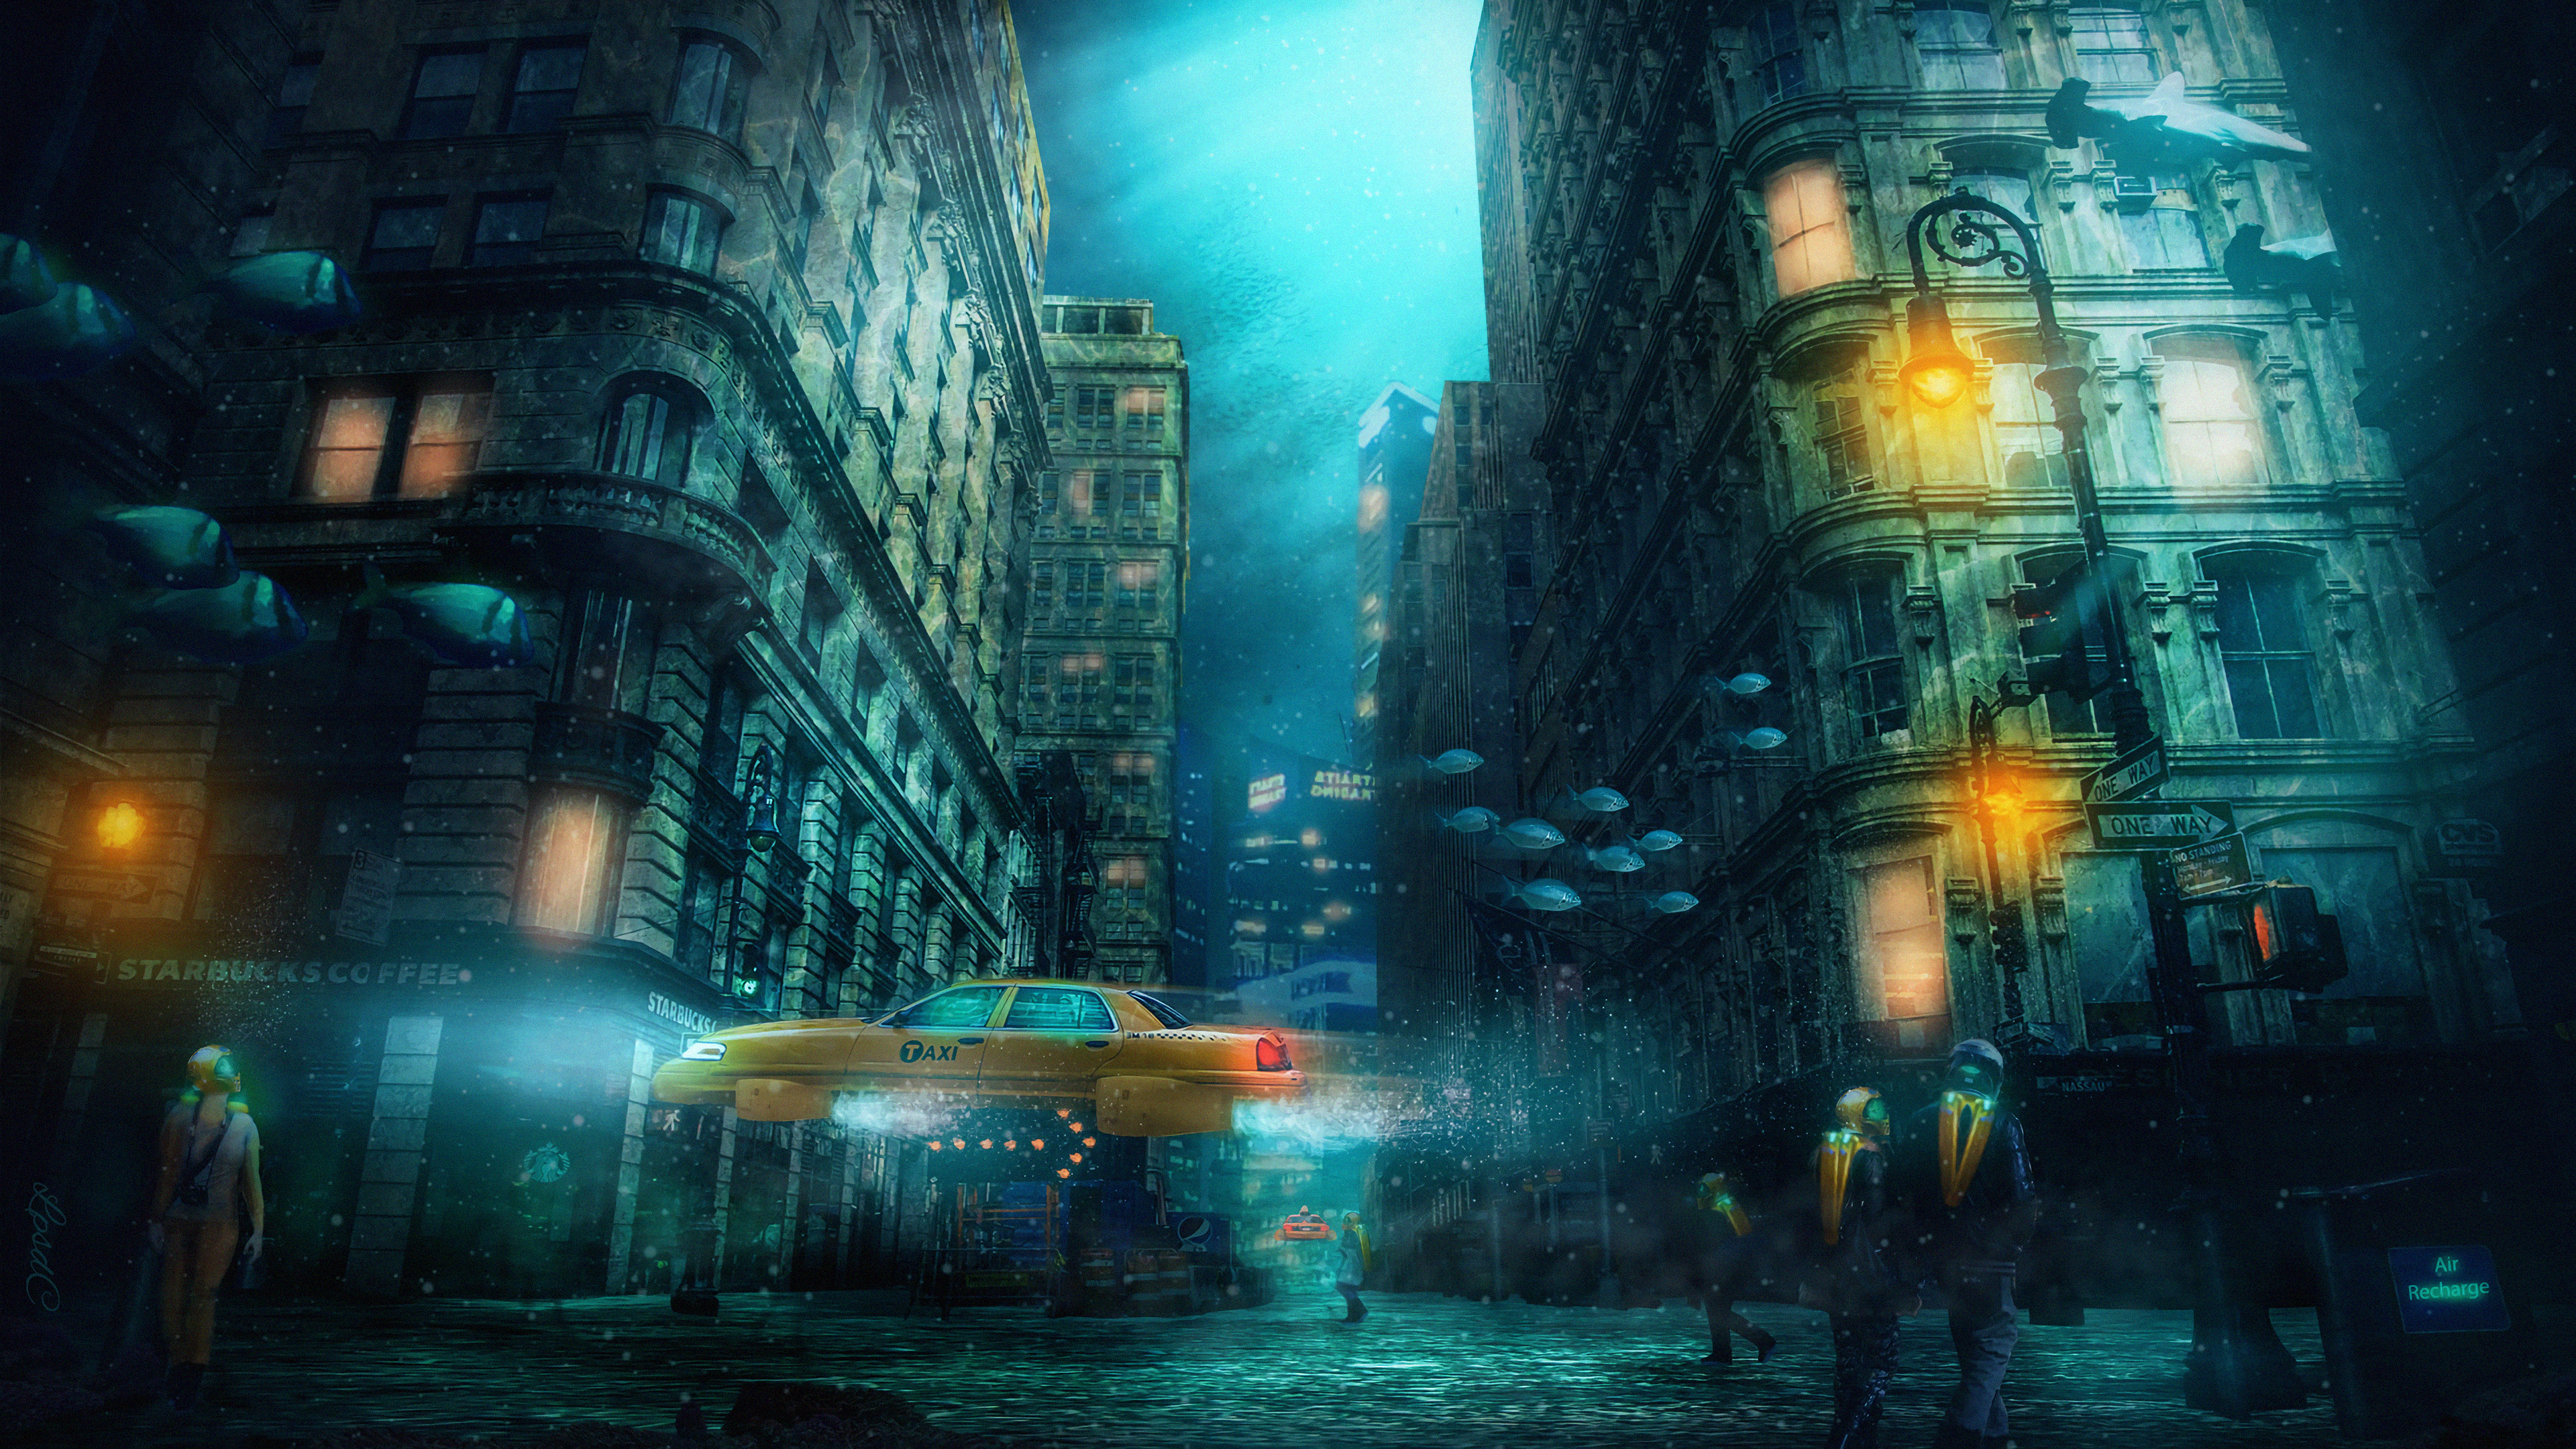 Building City Taxi Underwater 3840x2160